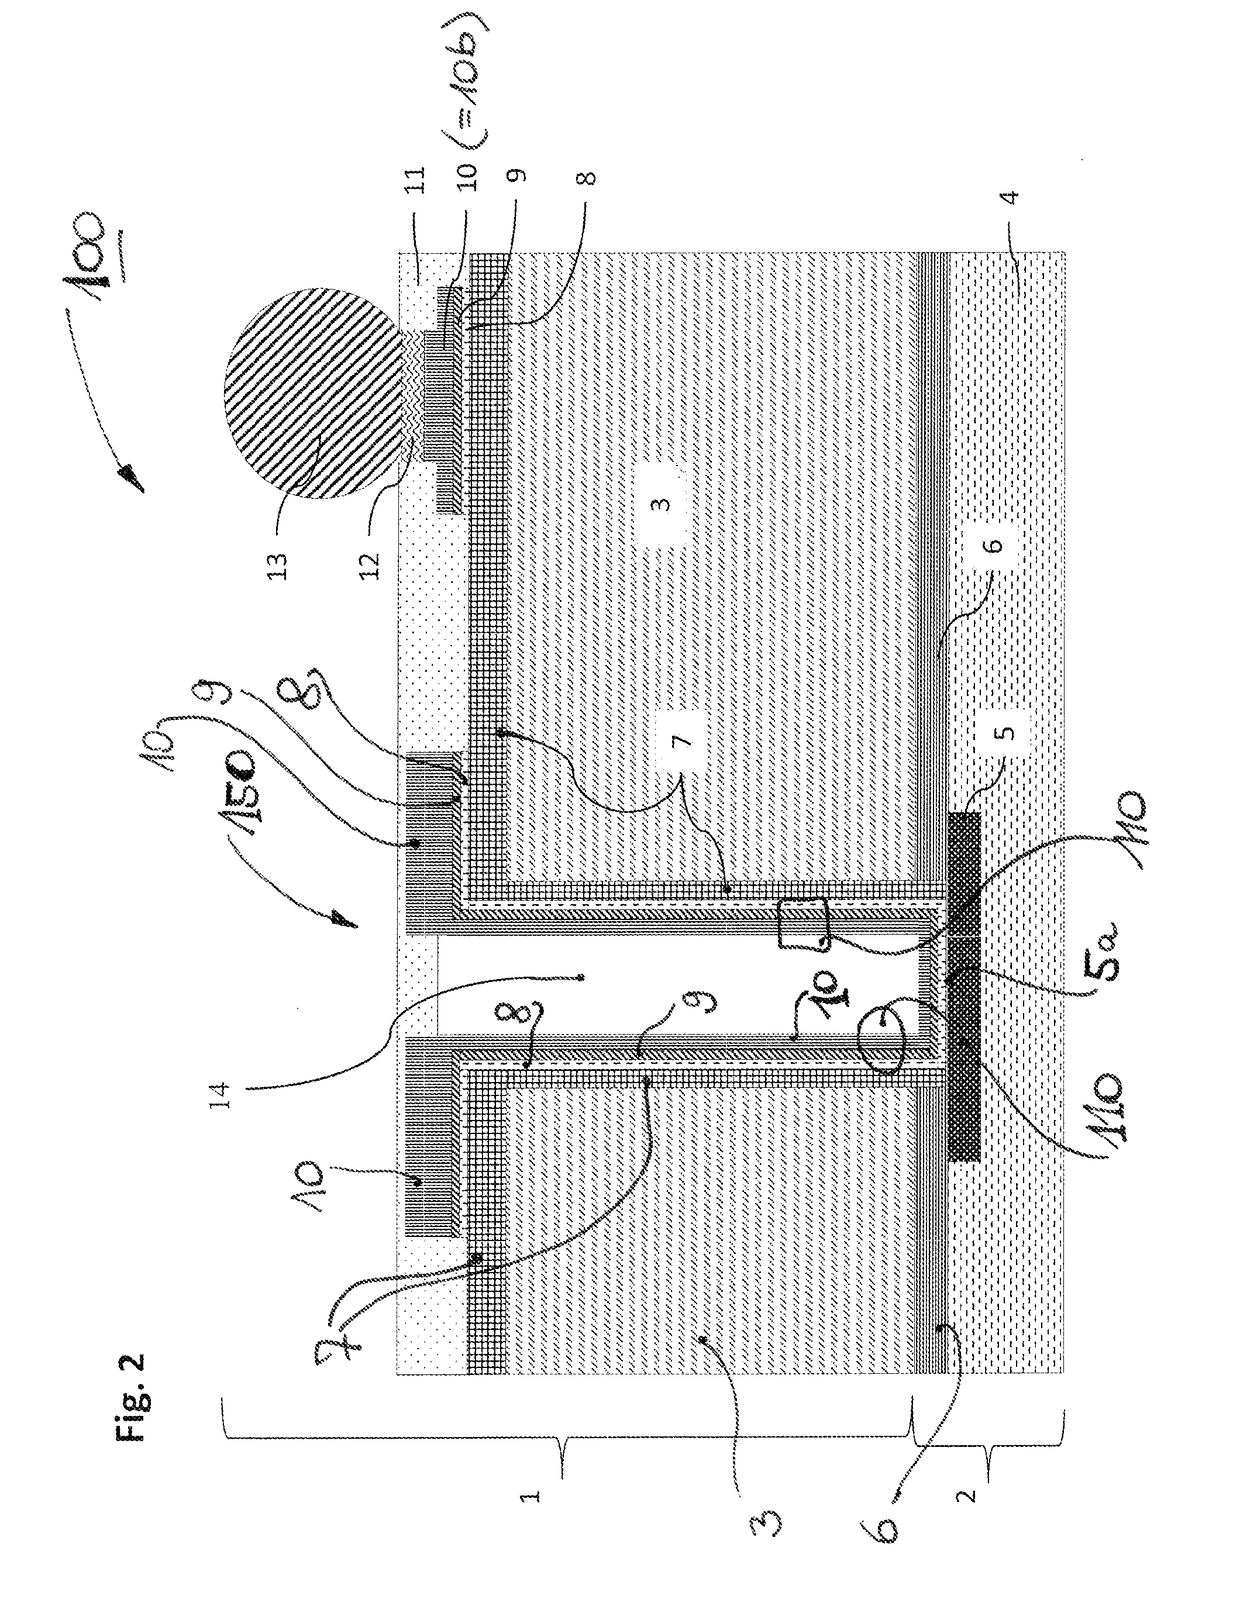 Electrical conductive vias in a semiconductor substrate and a corresponding manufacturing method